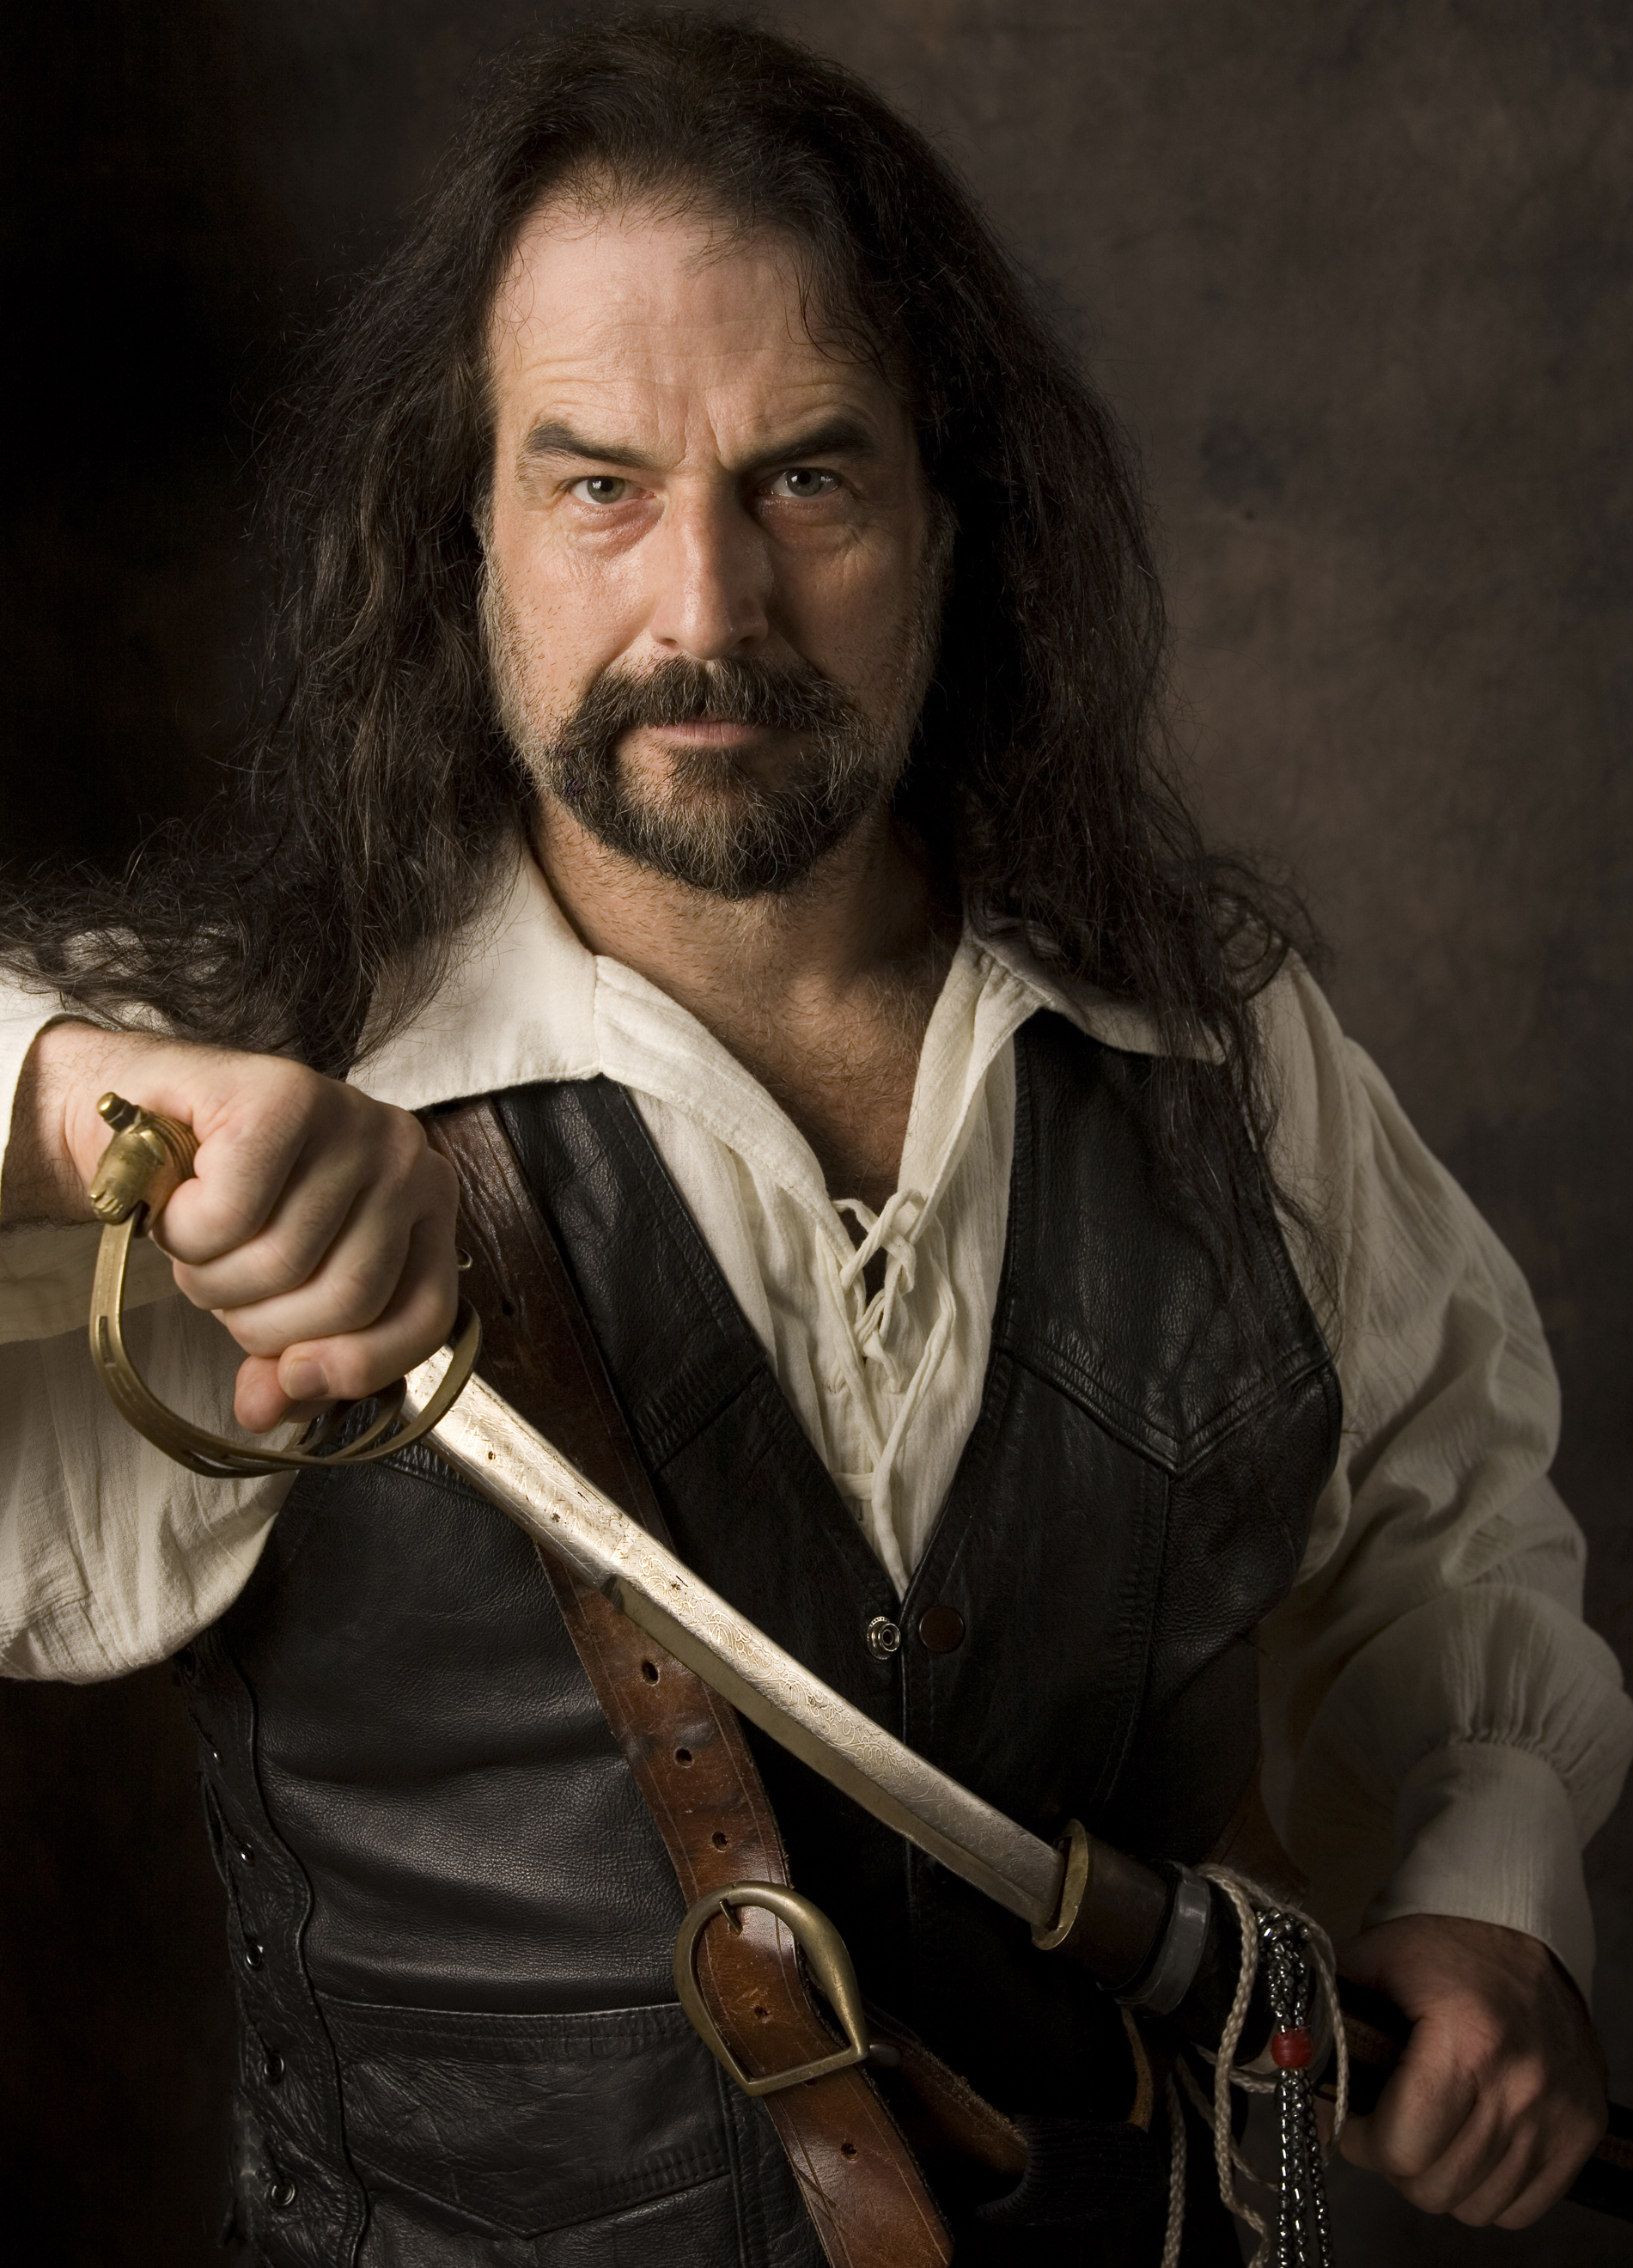 Kirk Larsen has played pirates, Pirate captains and period sailors in film and on TV